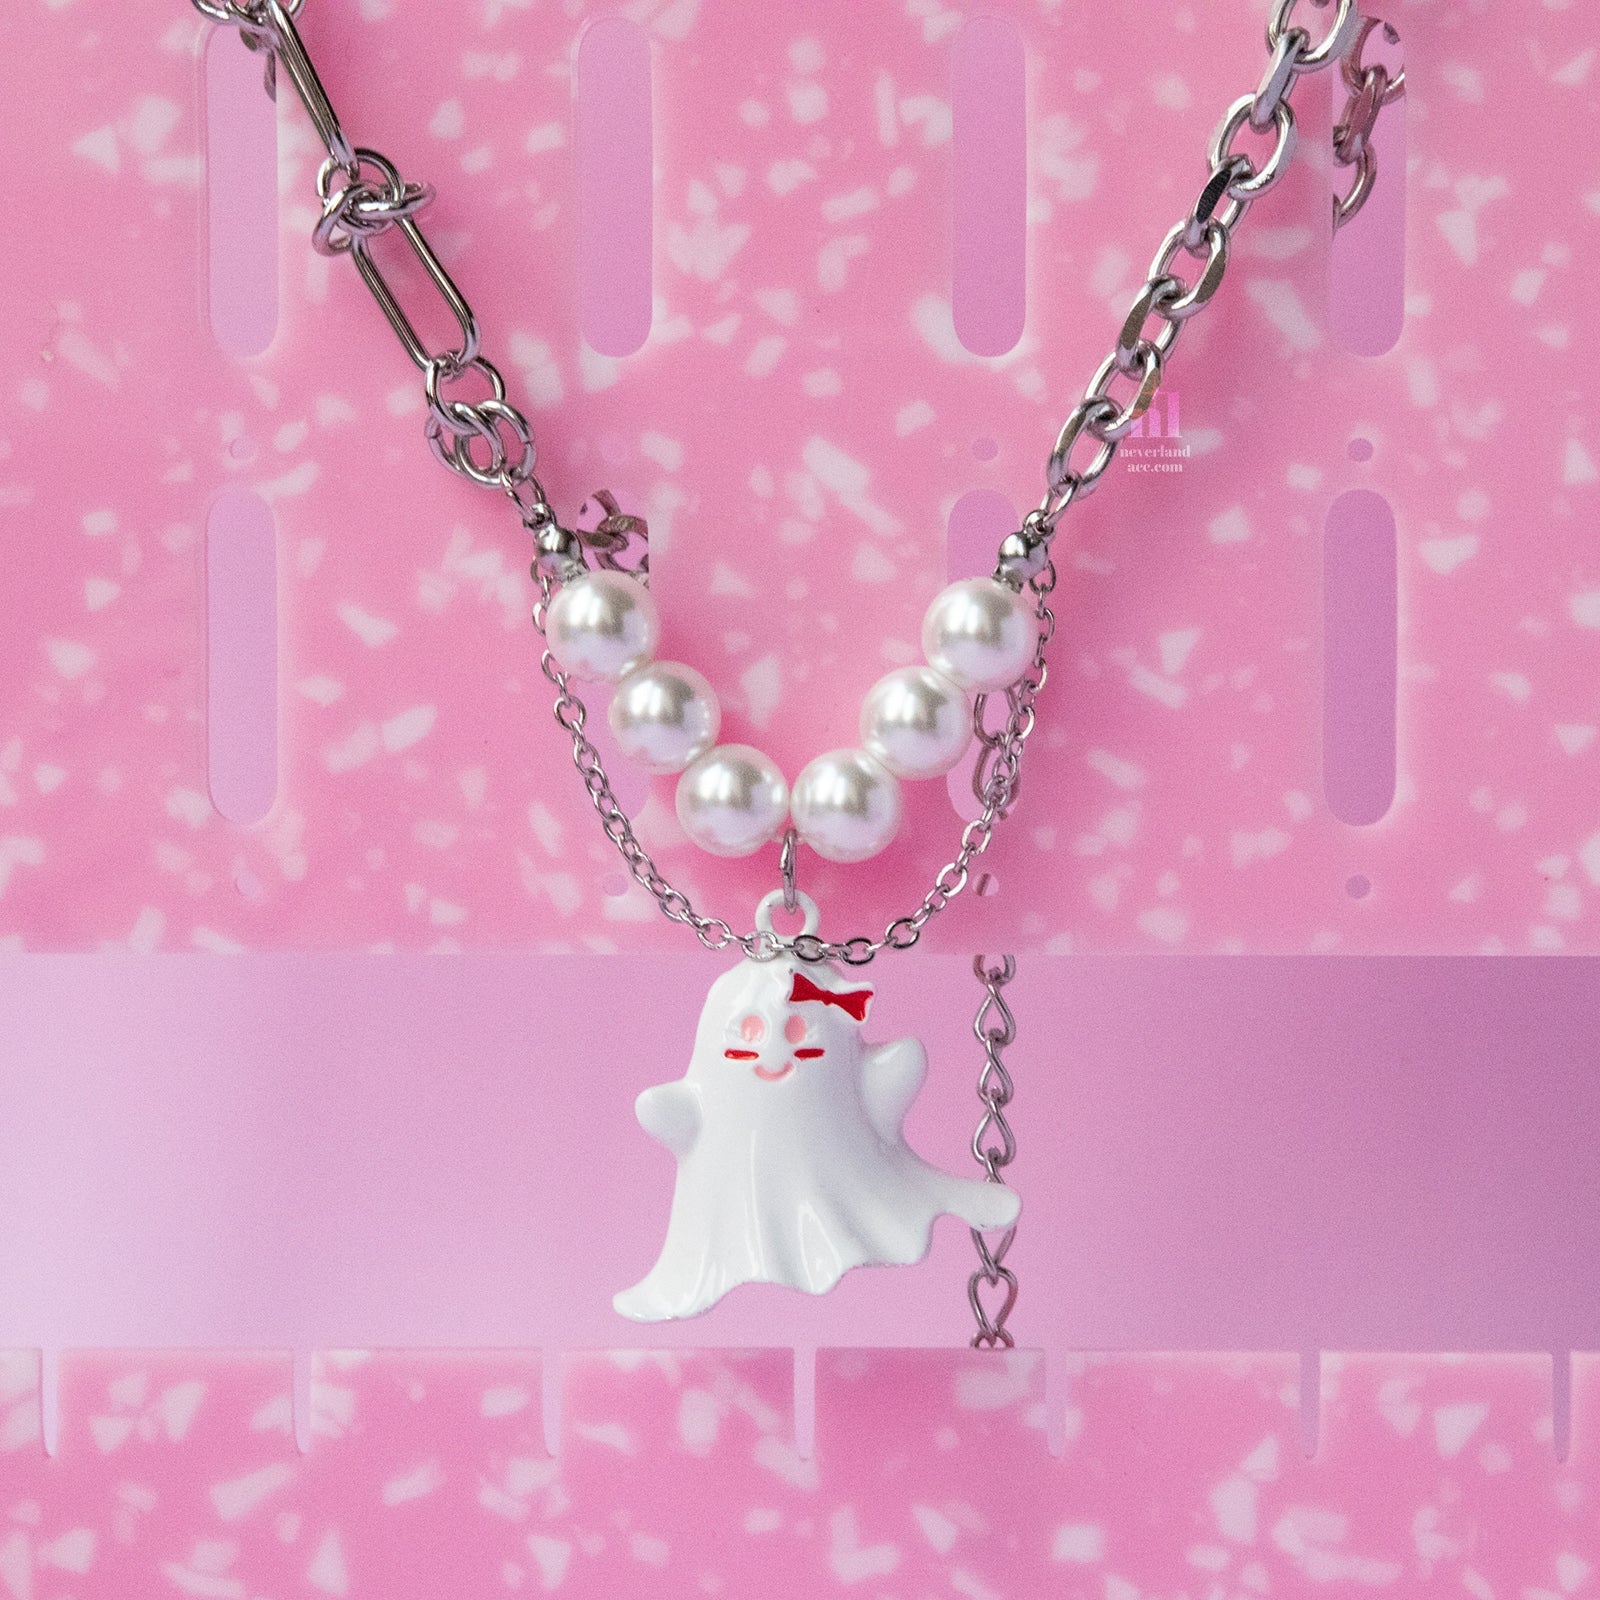 White Ghost Pendant Chain Necklace - neverland accessories